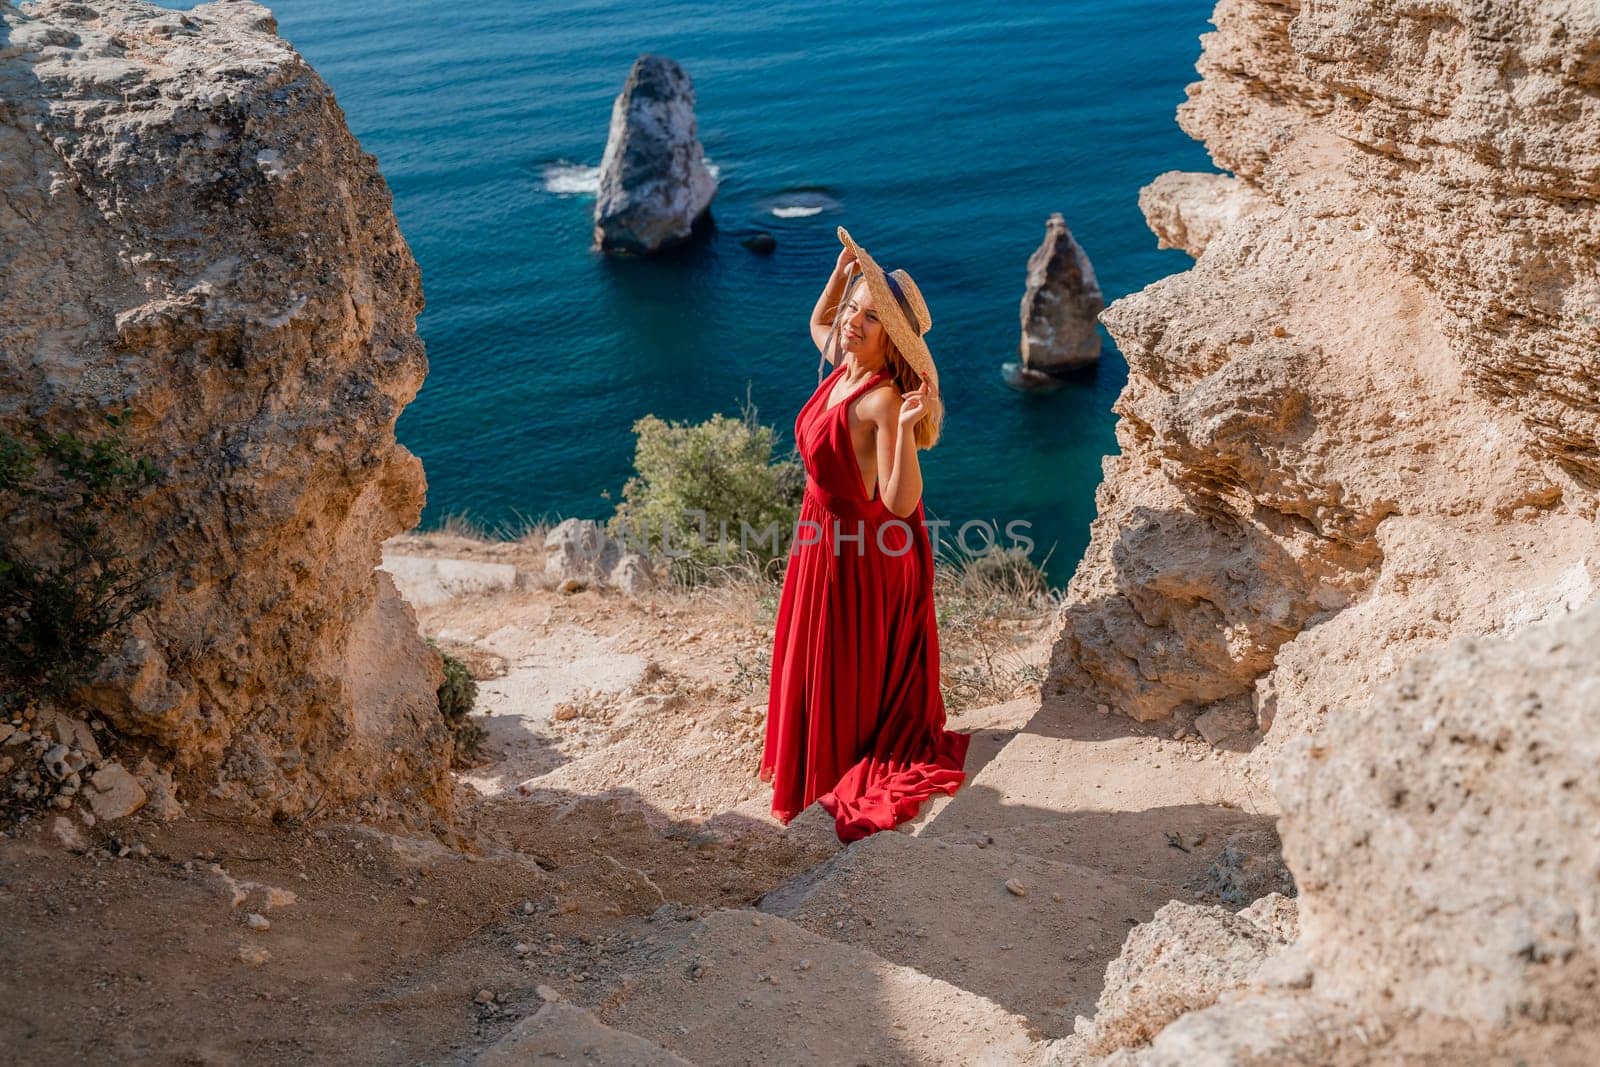 A woman in a flying red dress fluttering in the wind and a straw hat against the backdrop of the sea